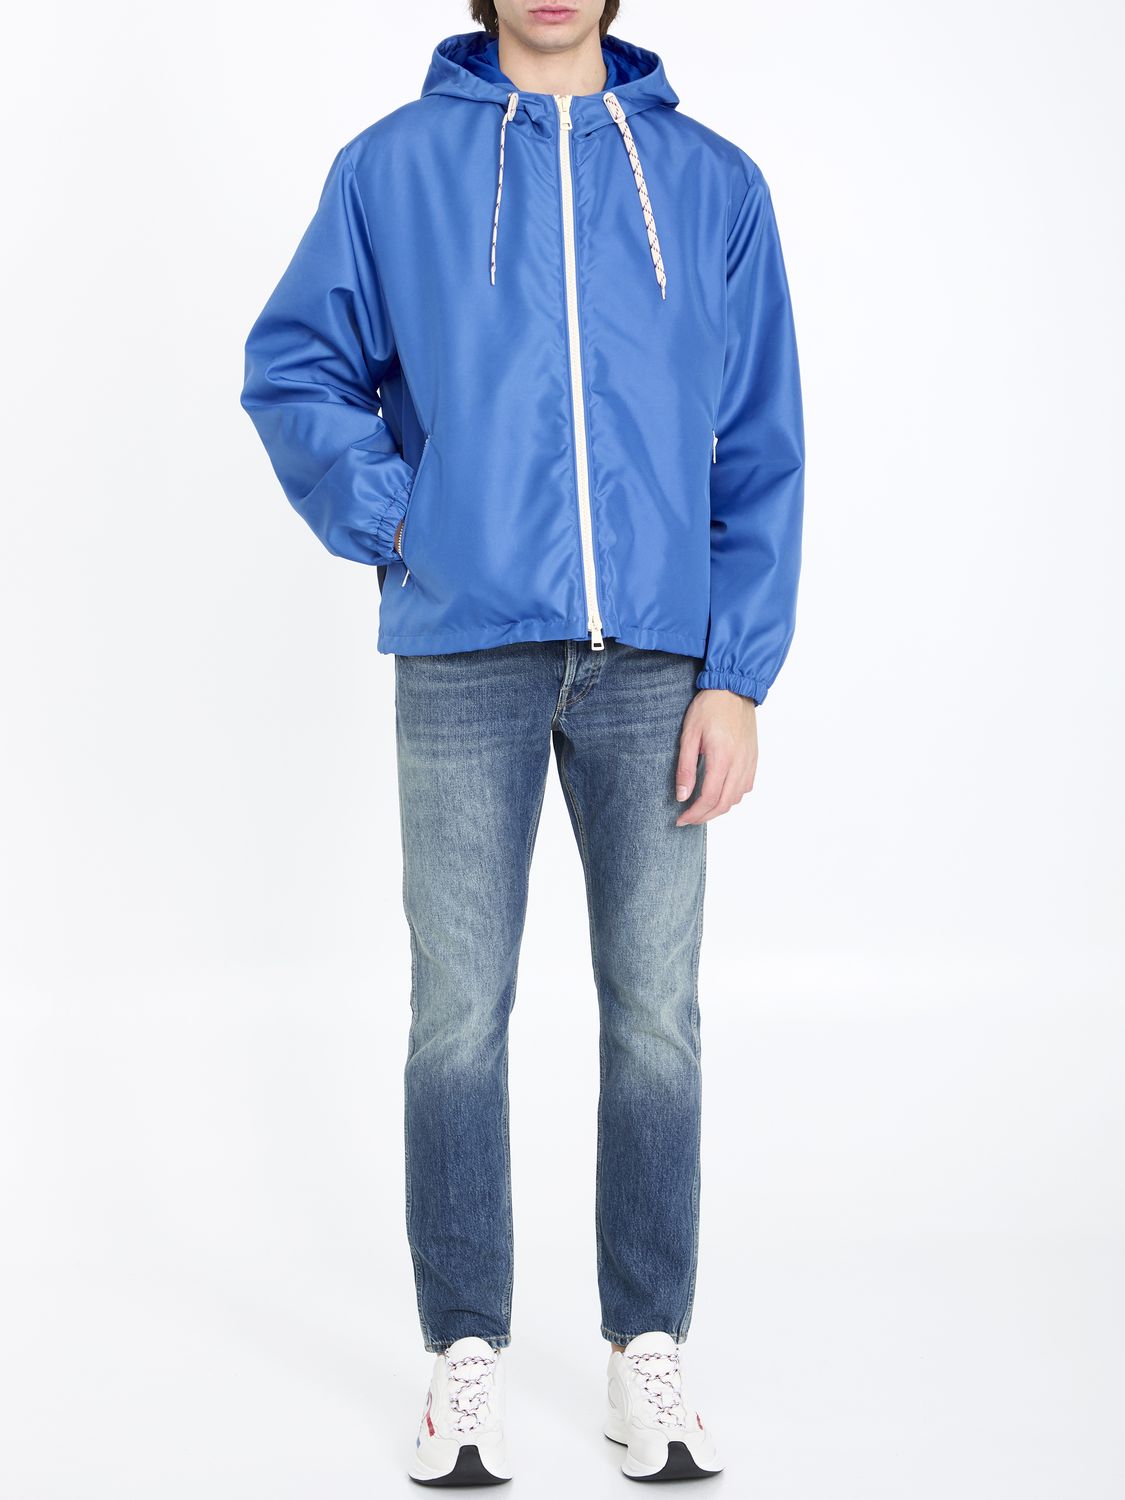 Blue Nylon Jacket with Web and Gucci 1921 Details for Men